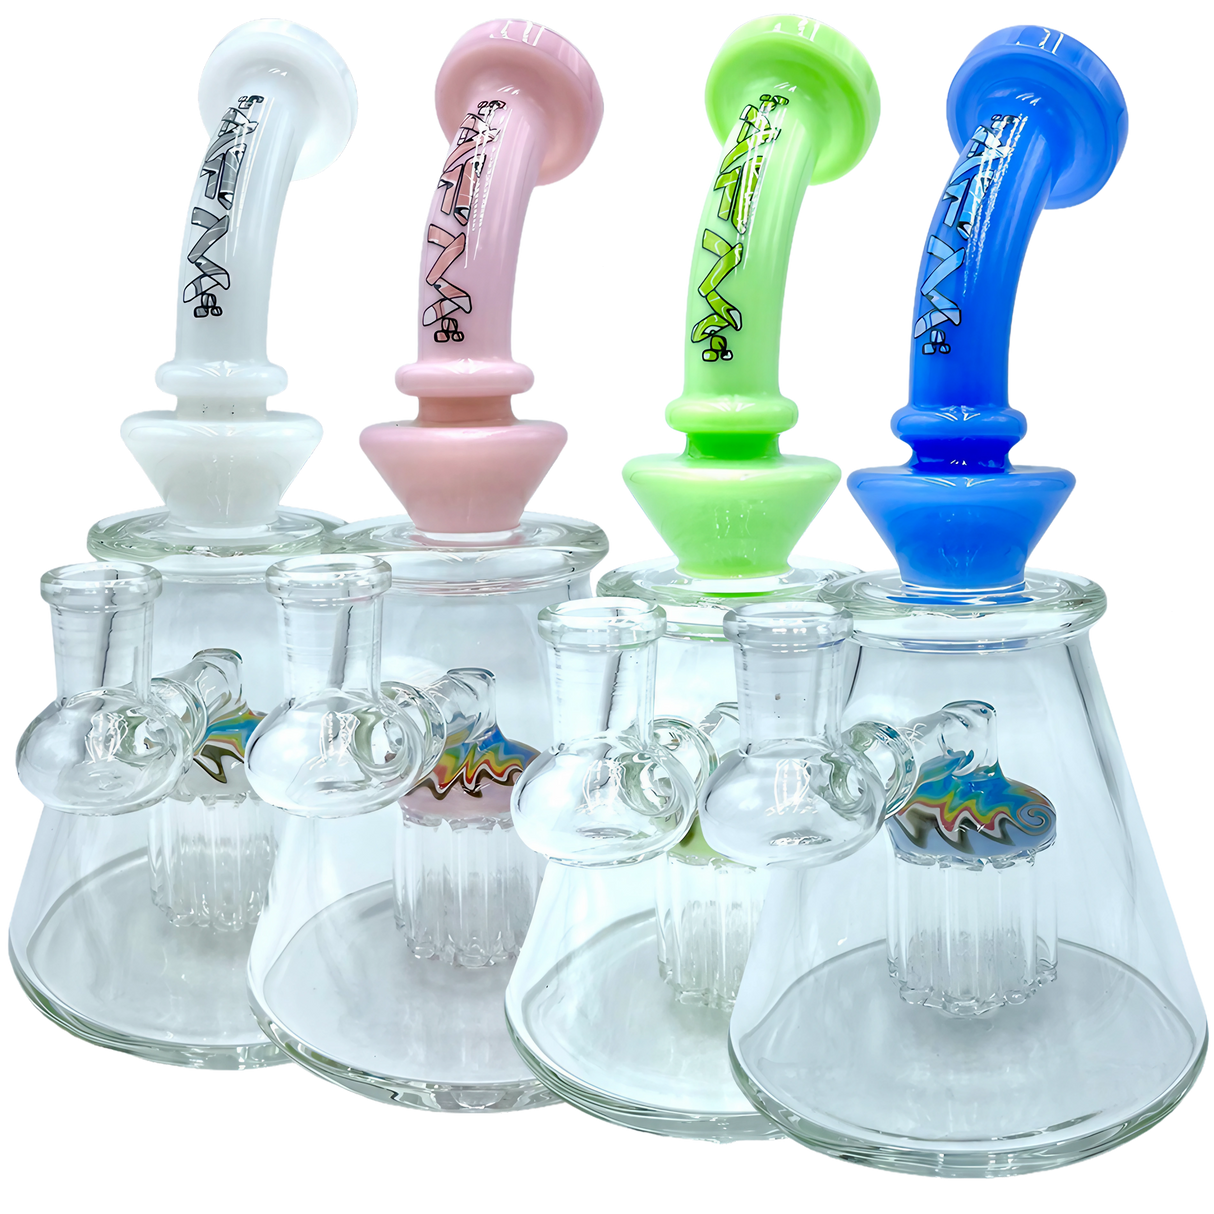 AFM The Reversal 8 Arm Rig Collection - 8" Dab Rigs with Percolators - Front View